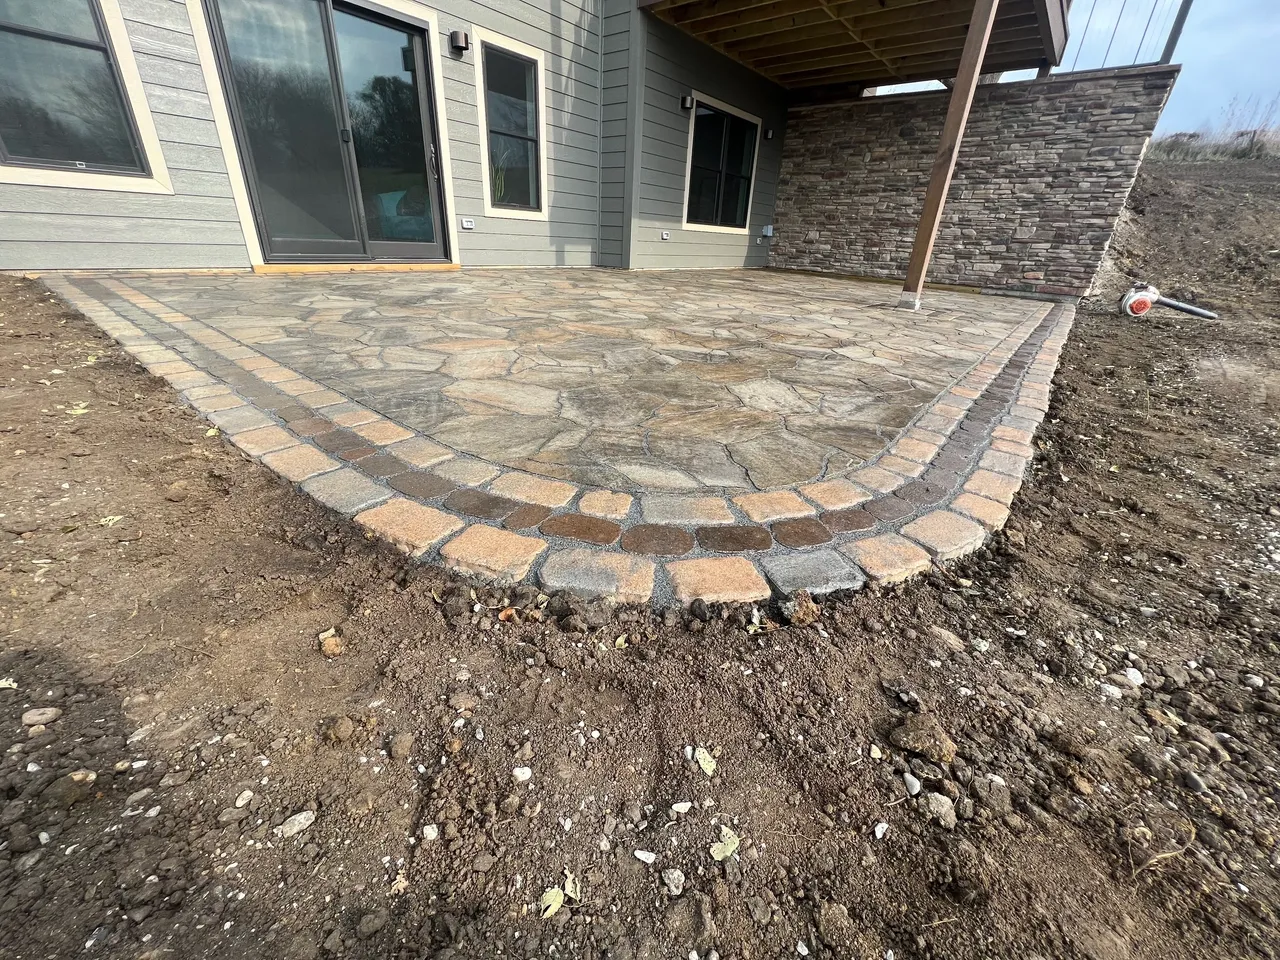 A patio with brick and stone in the middle of it.